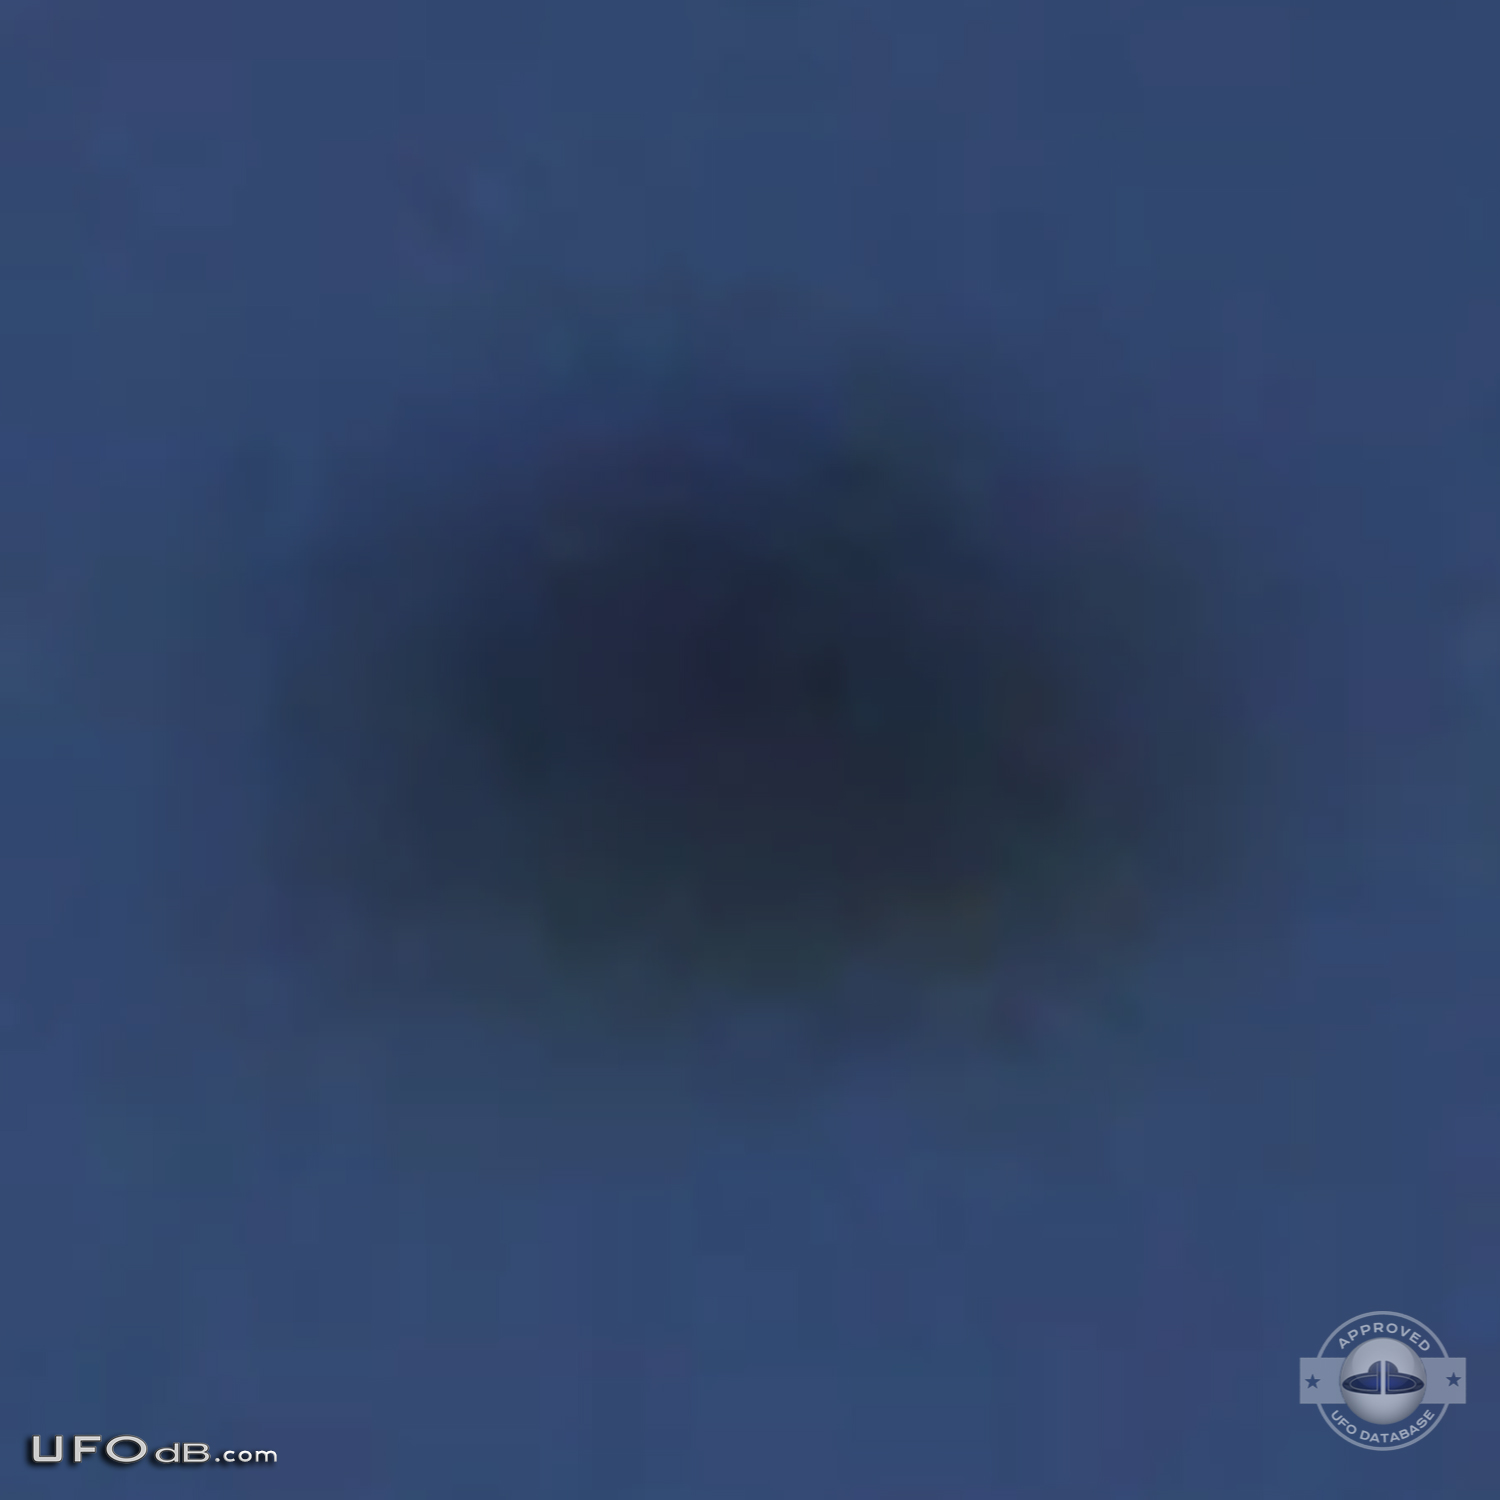 Two ufo pictures taken in the high mountains - Puerto Rico - July 2011 UFO Picture #376-4